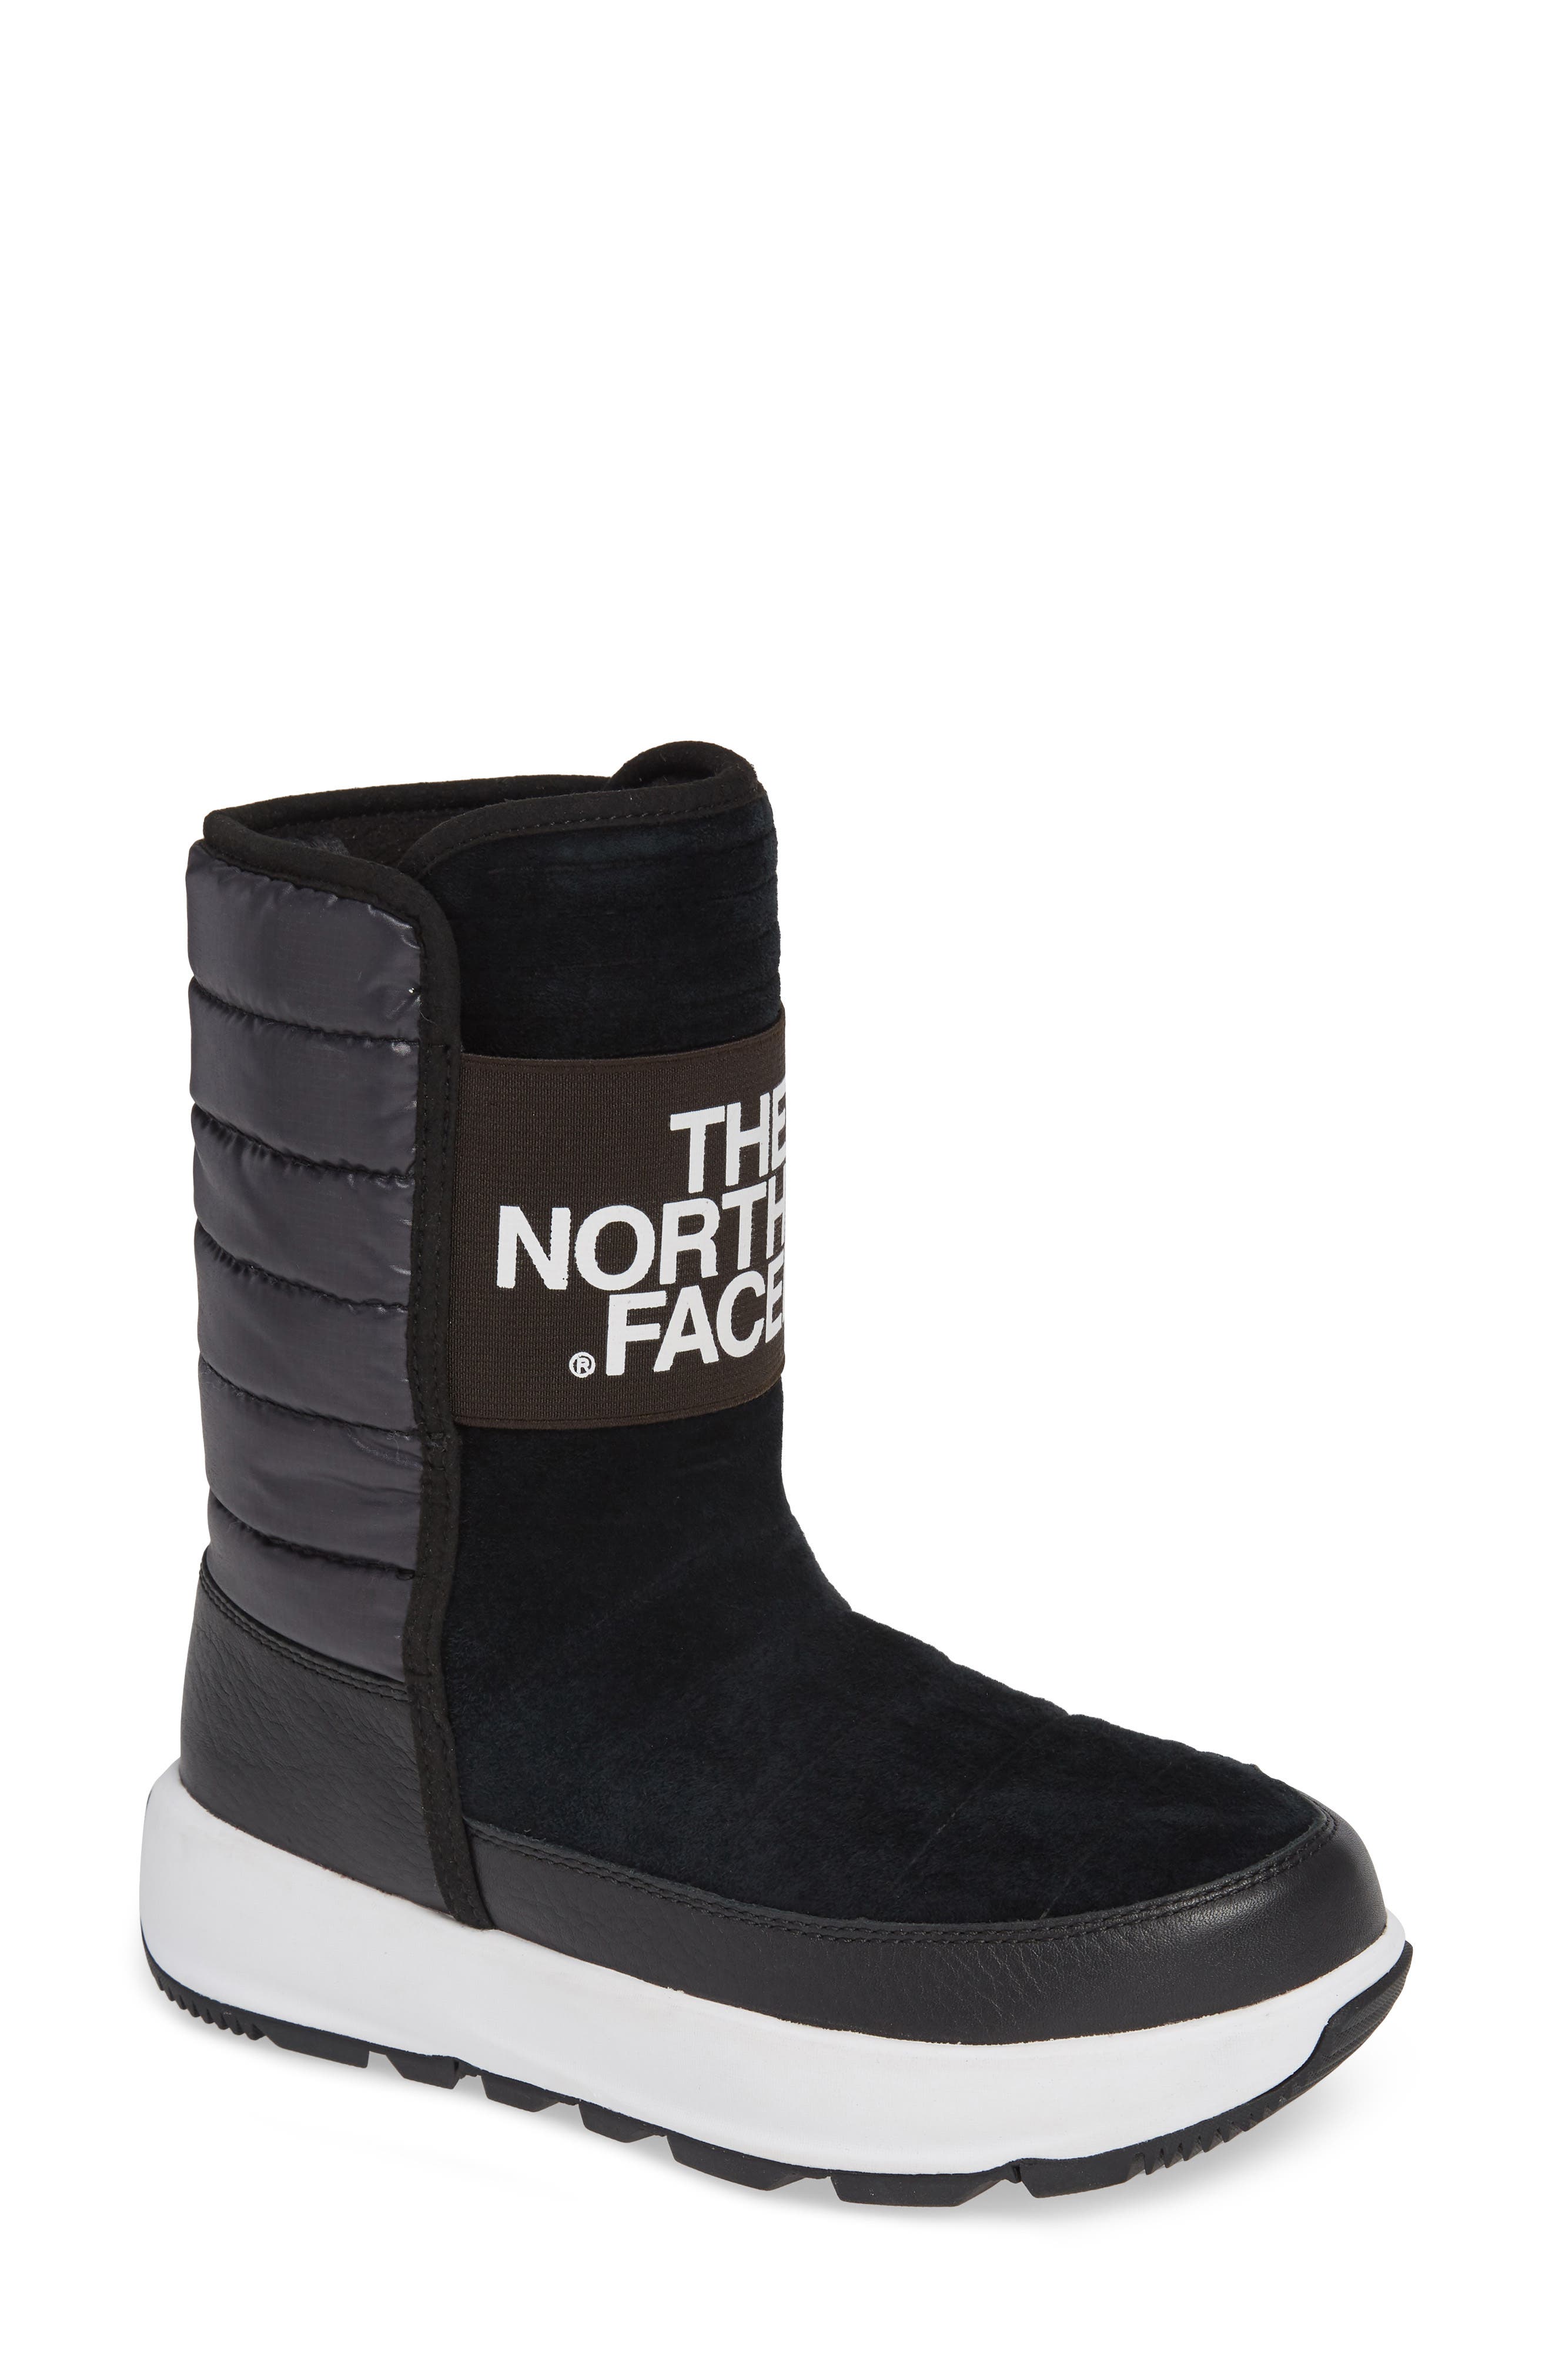 north face womens boots winter